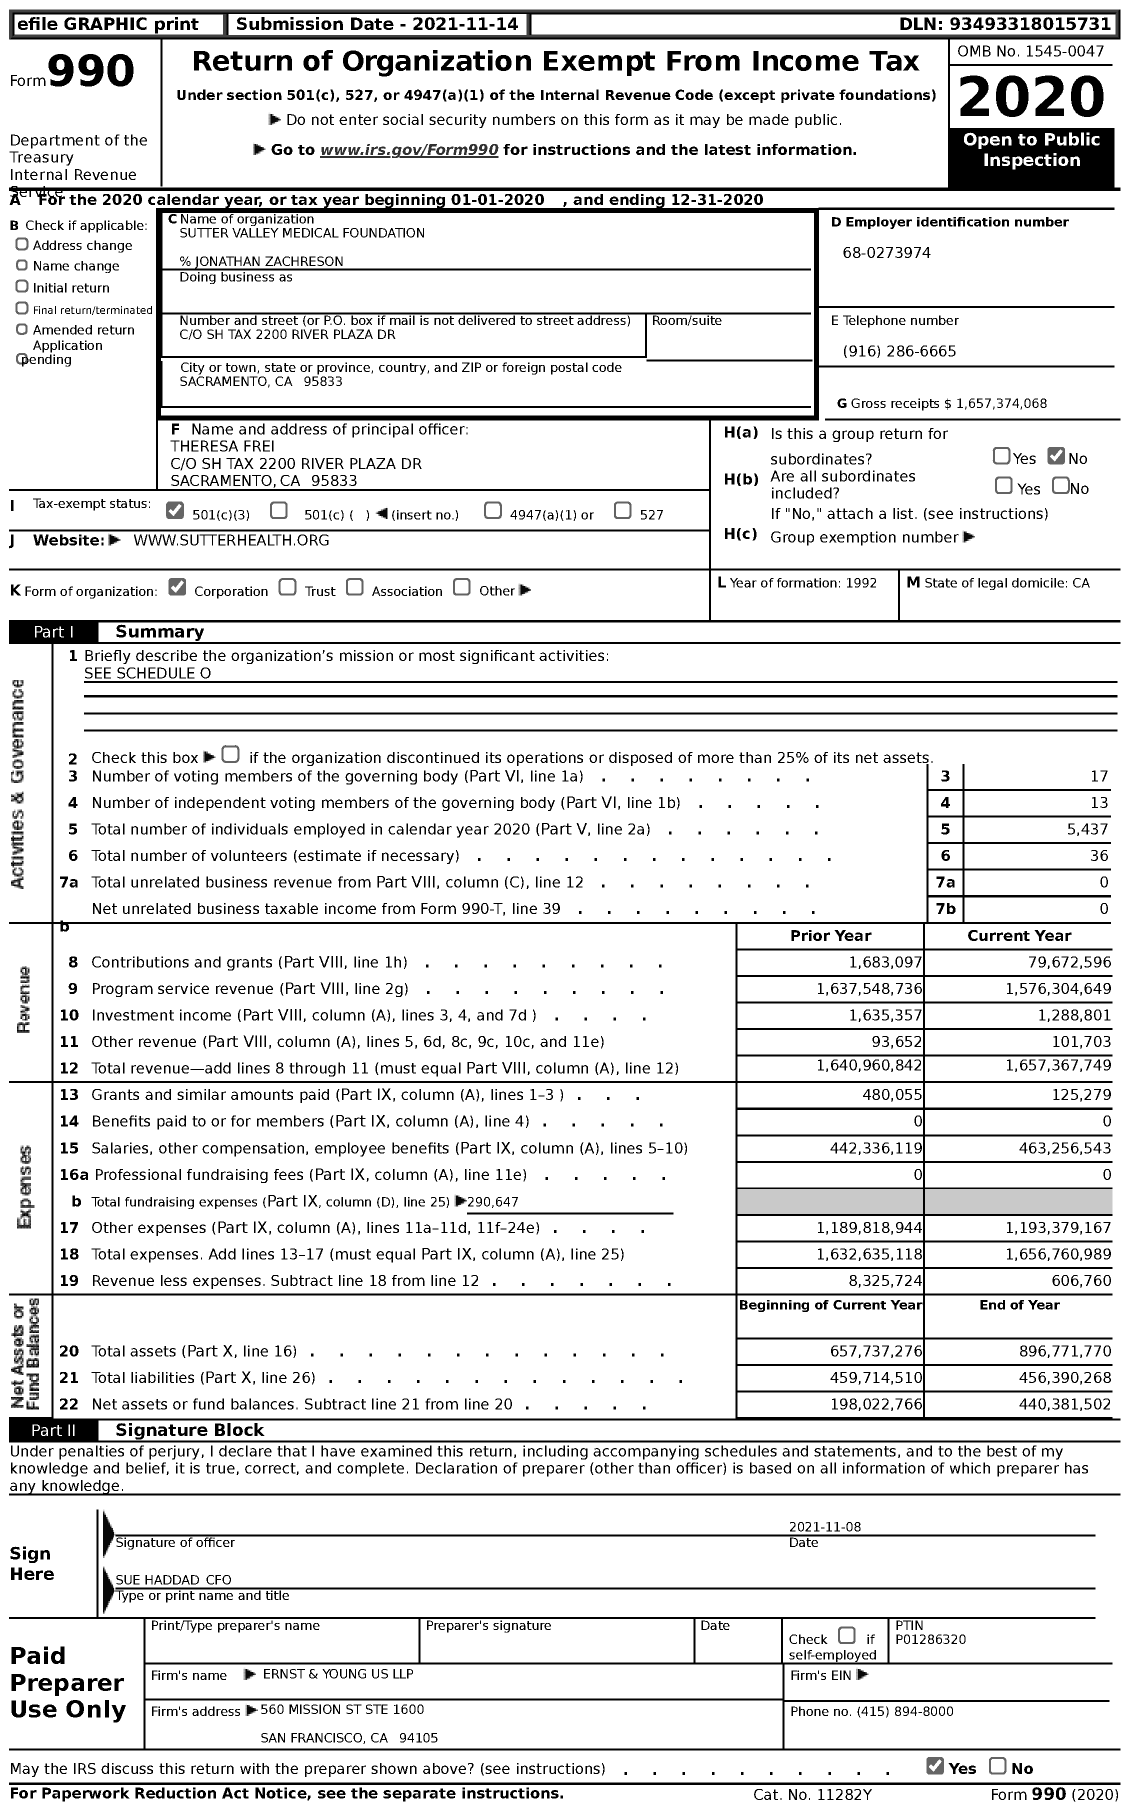 Image of first page of 2020 Form 990 for Sutter Medical Foundation (SMF)